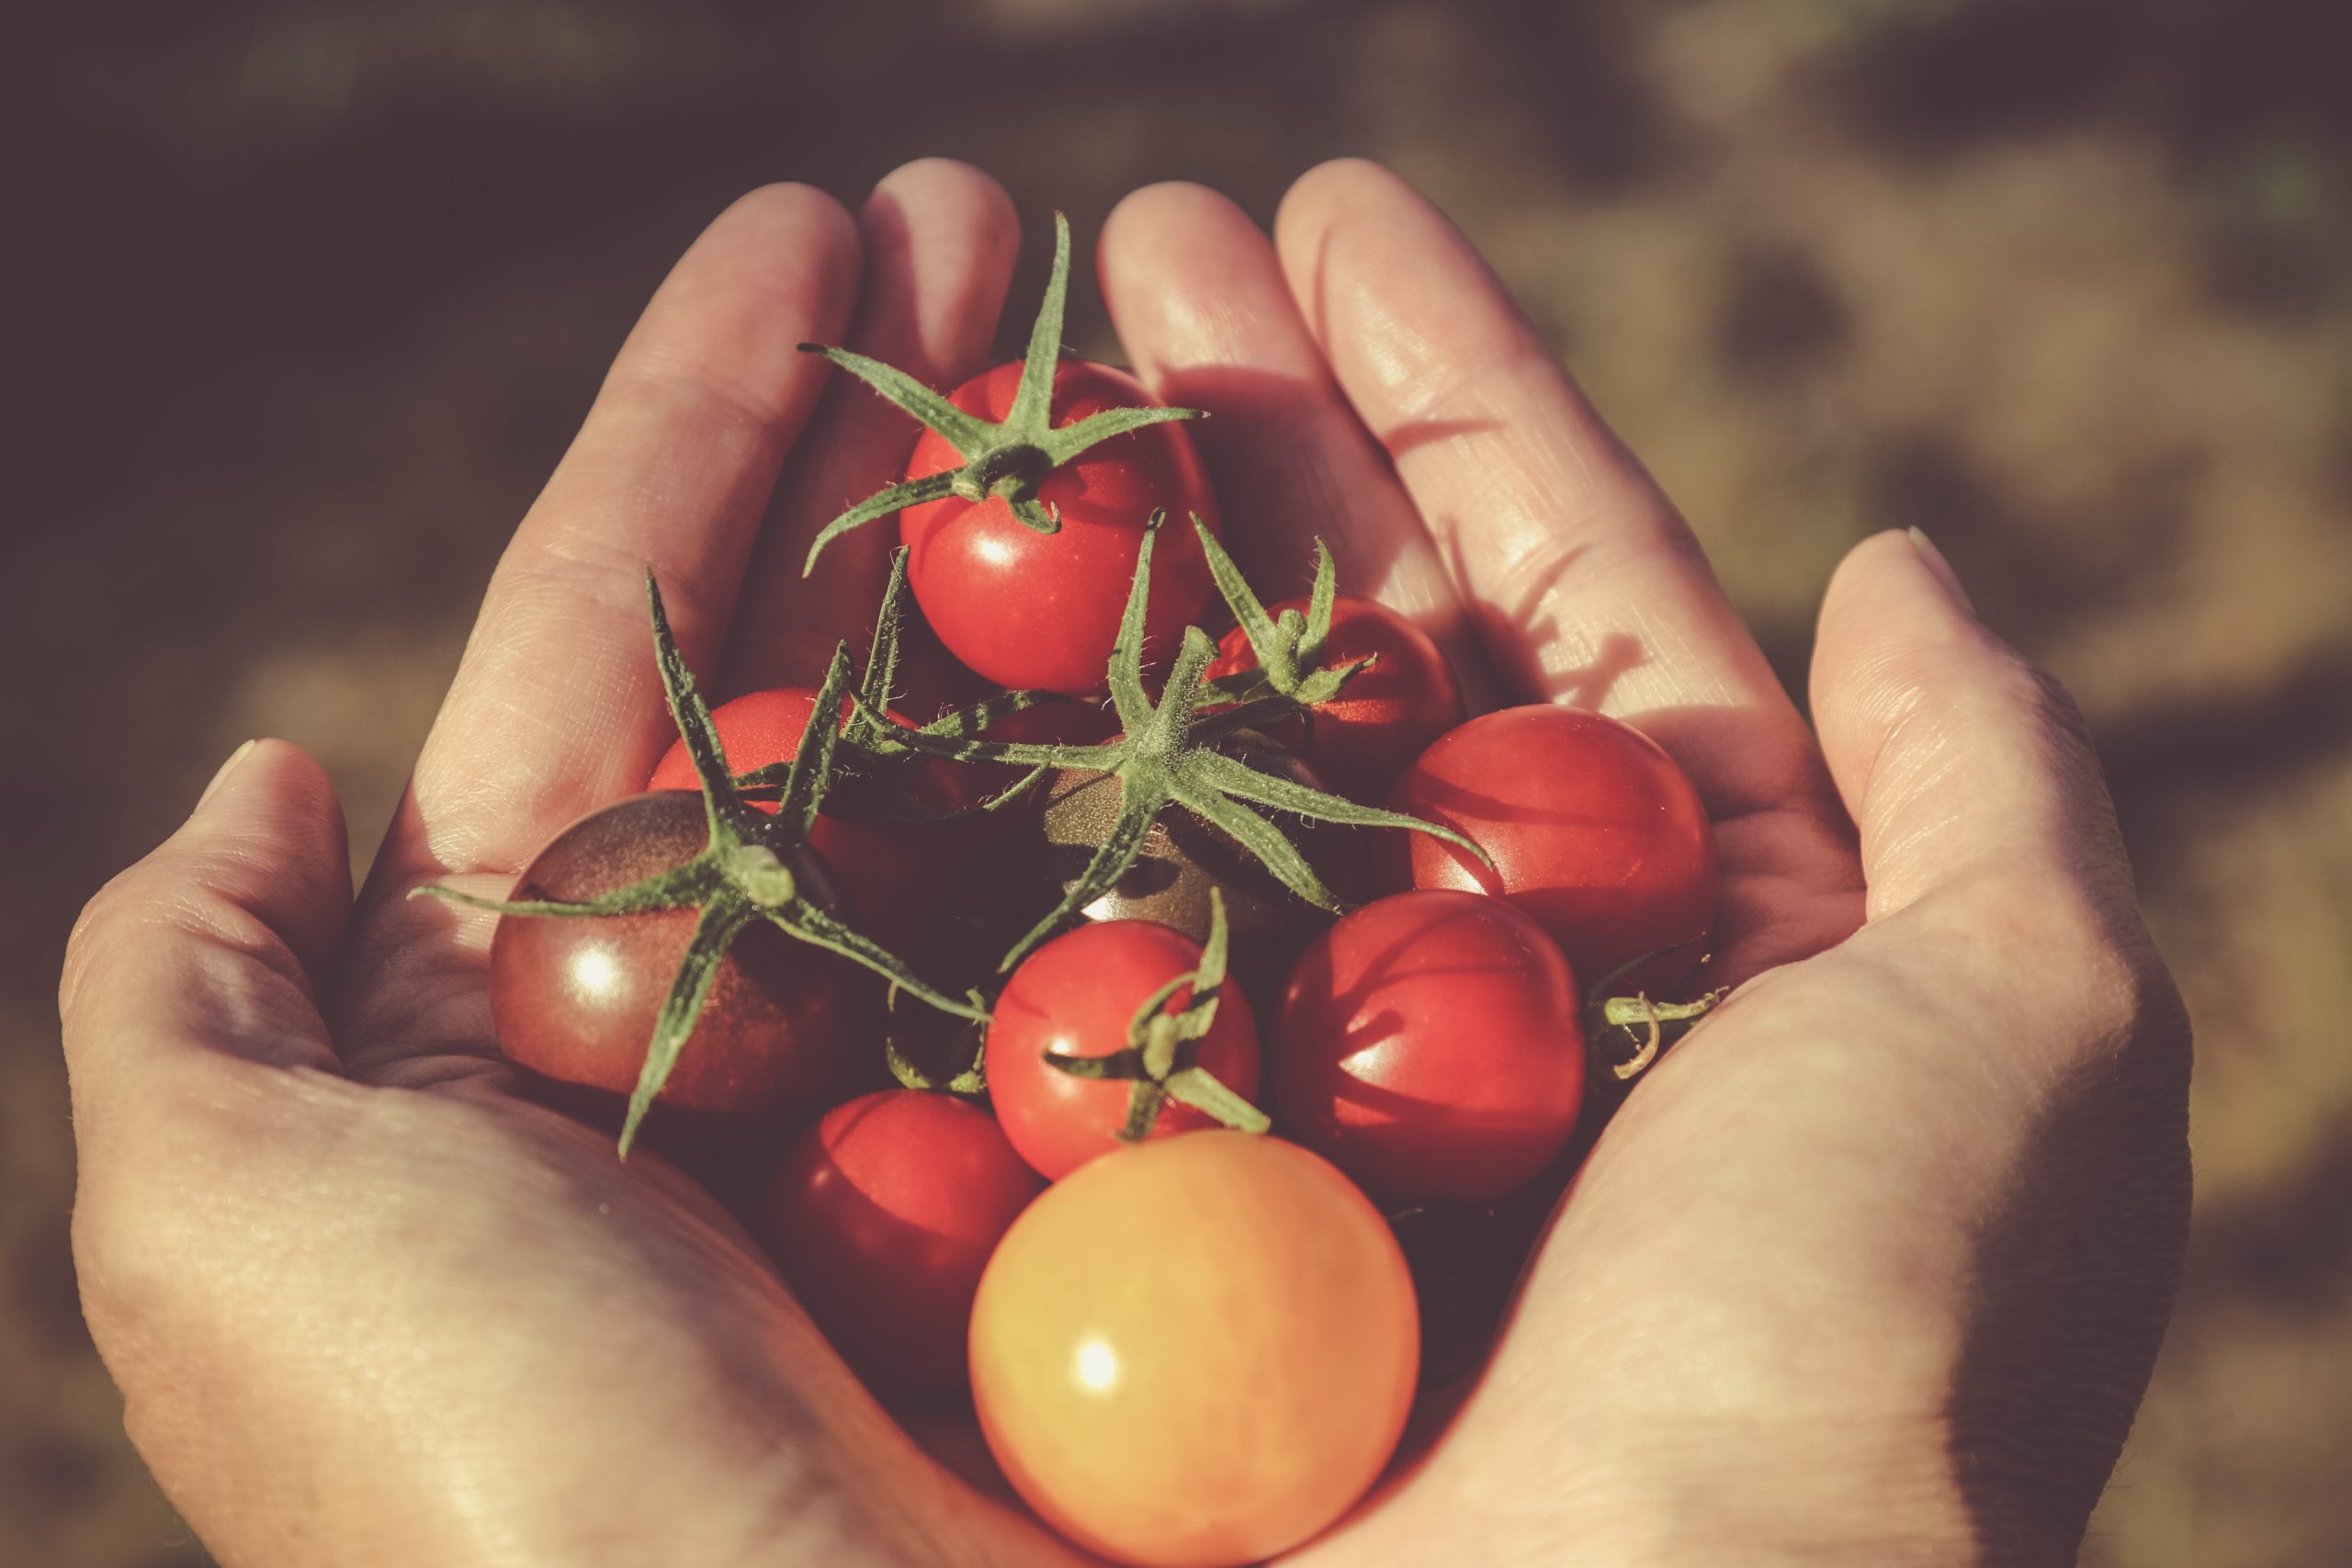 Tomatoes in the hand